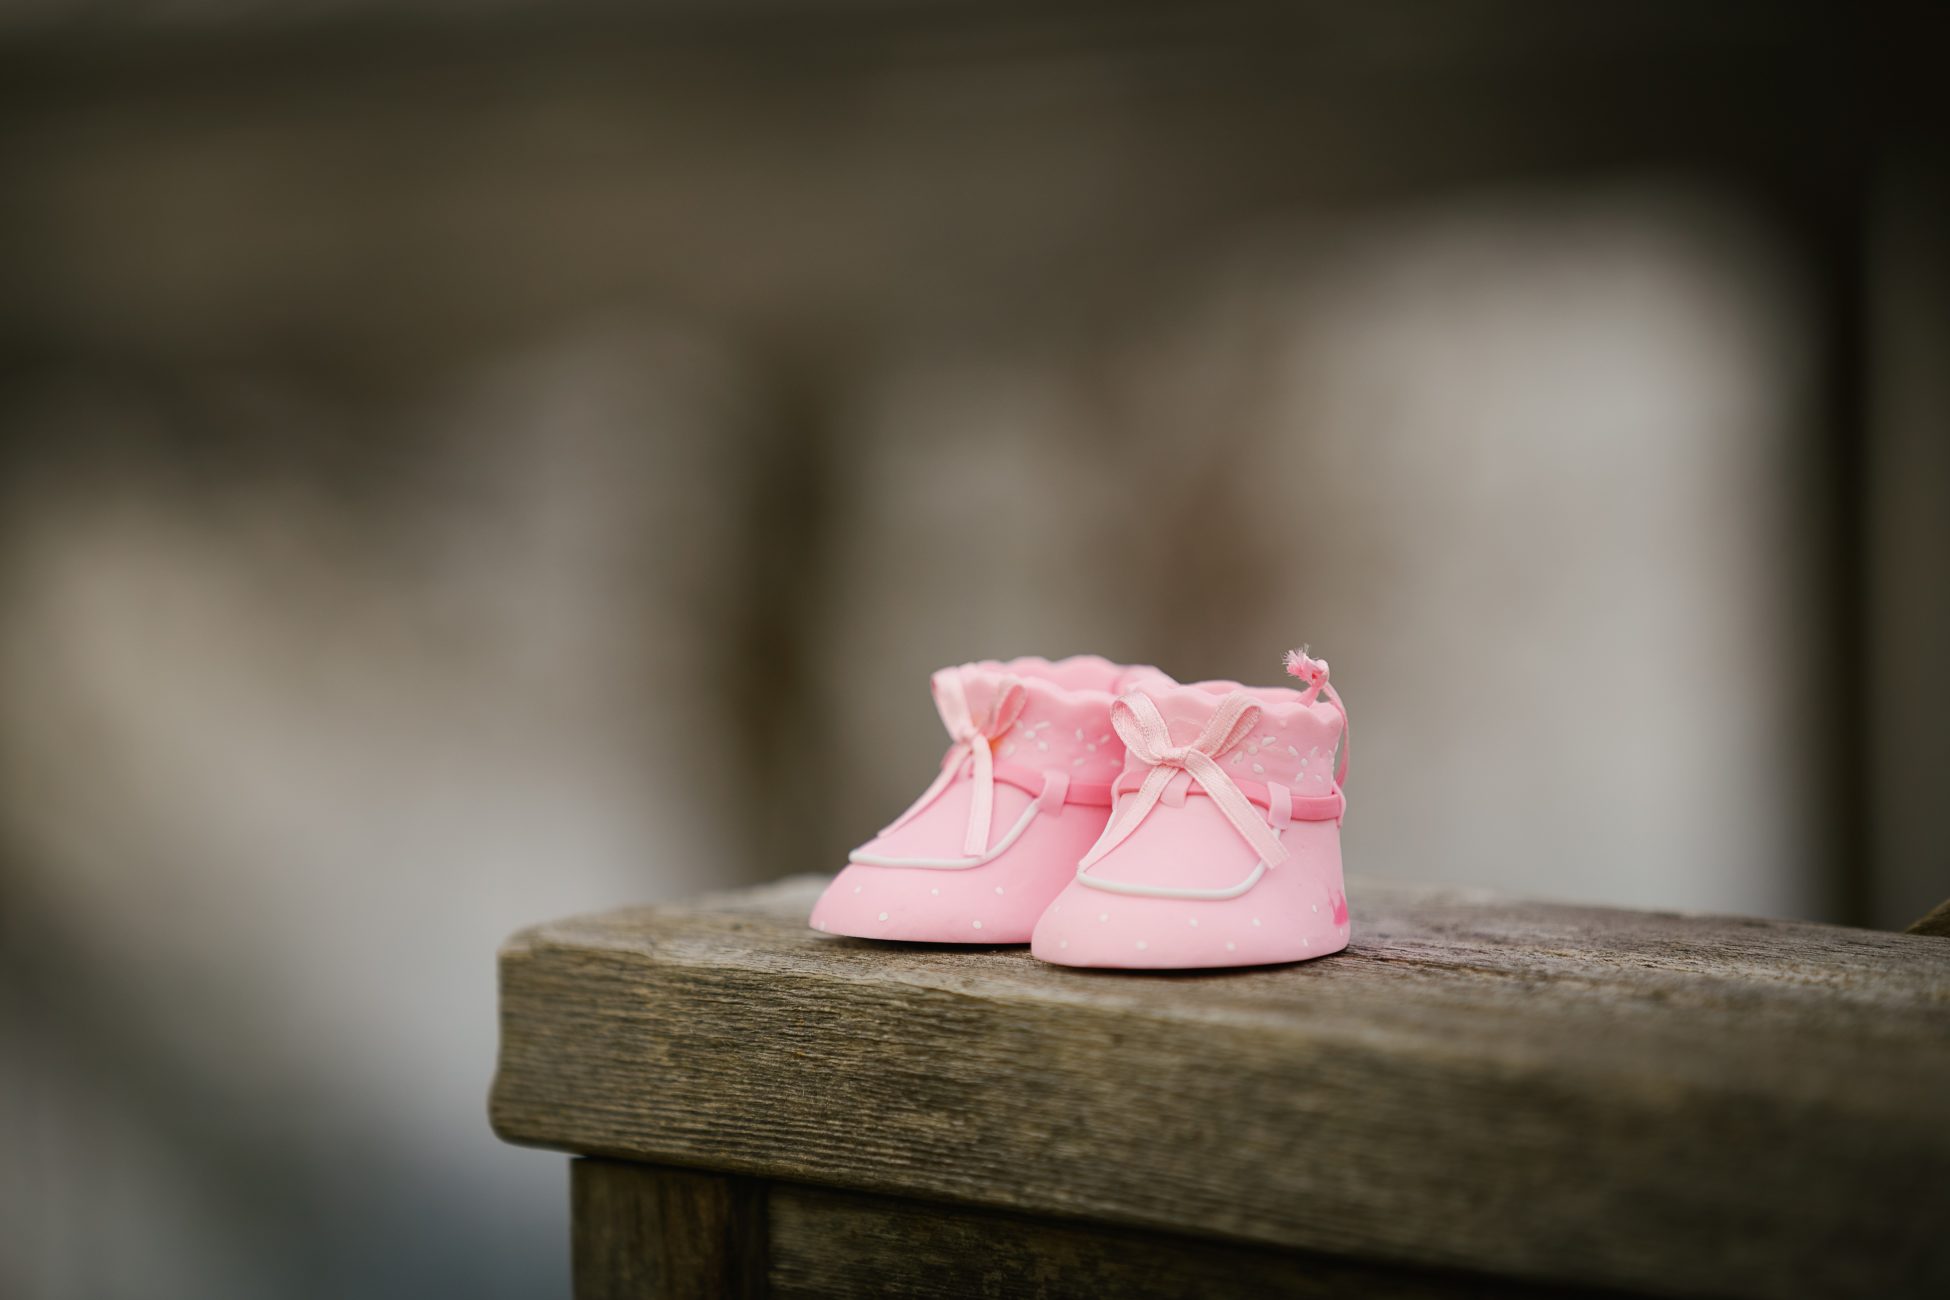 MOPS Blog baby shoes permission